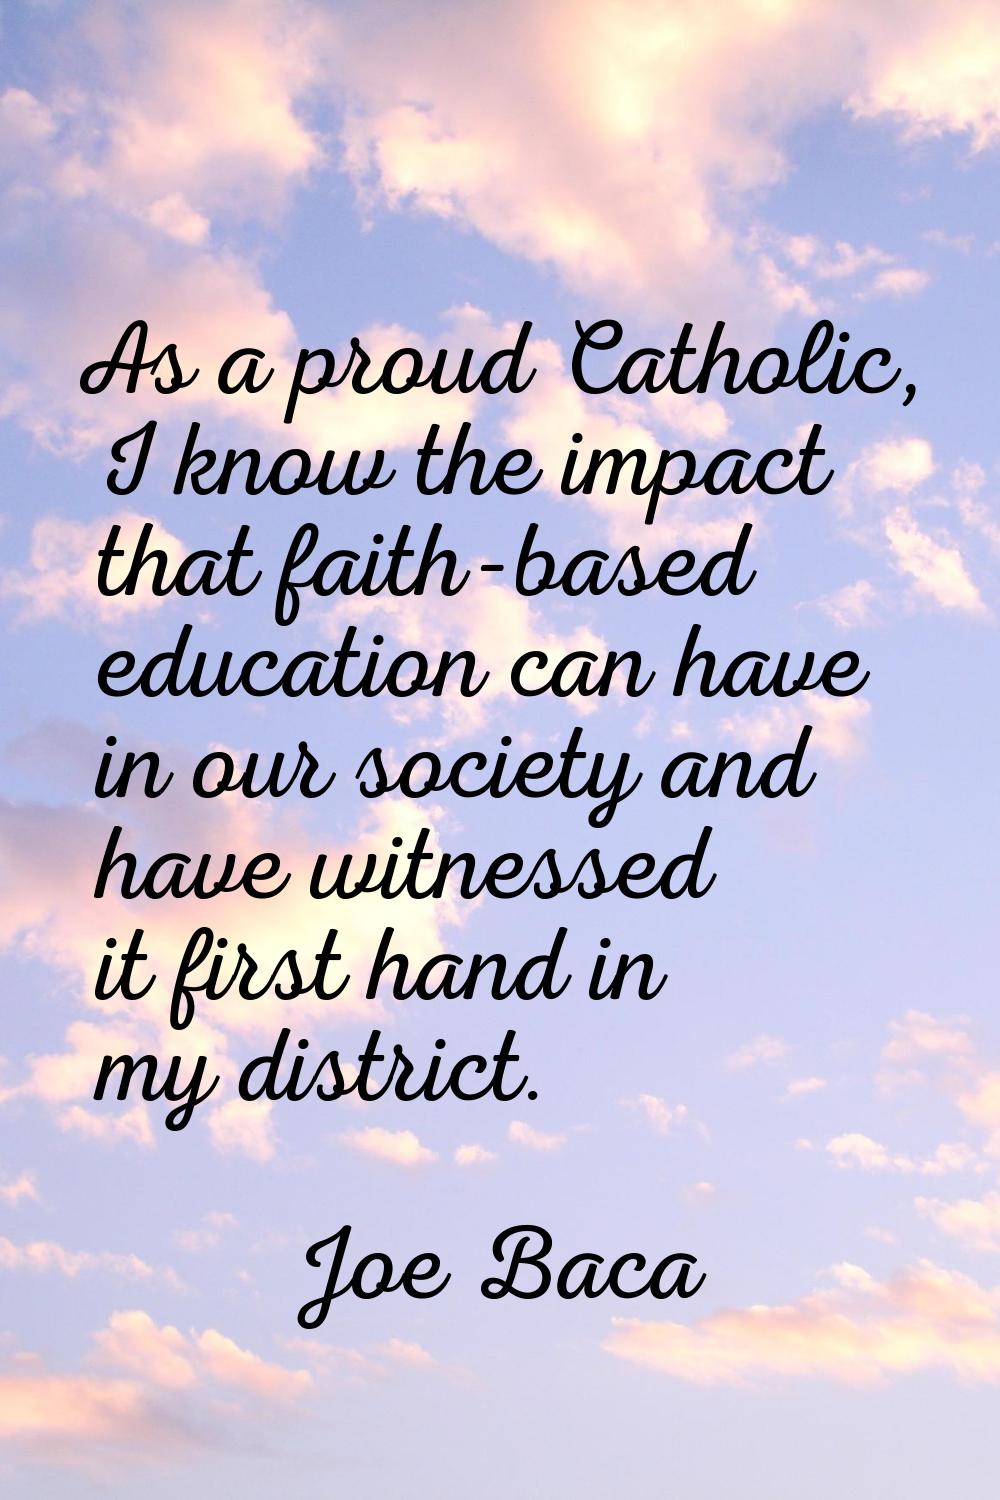 As a proud Catholic, I know the impact that faith-based education can have in our society and have 